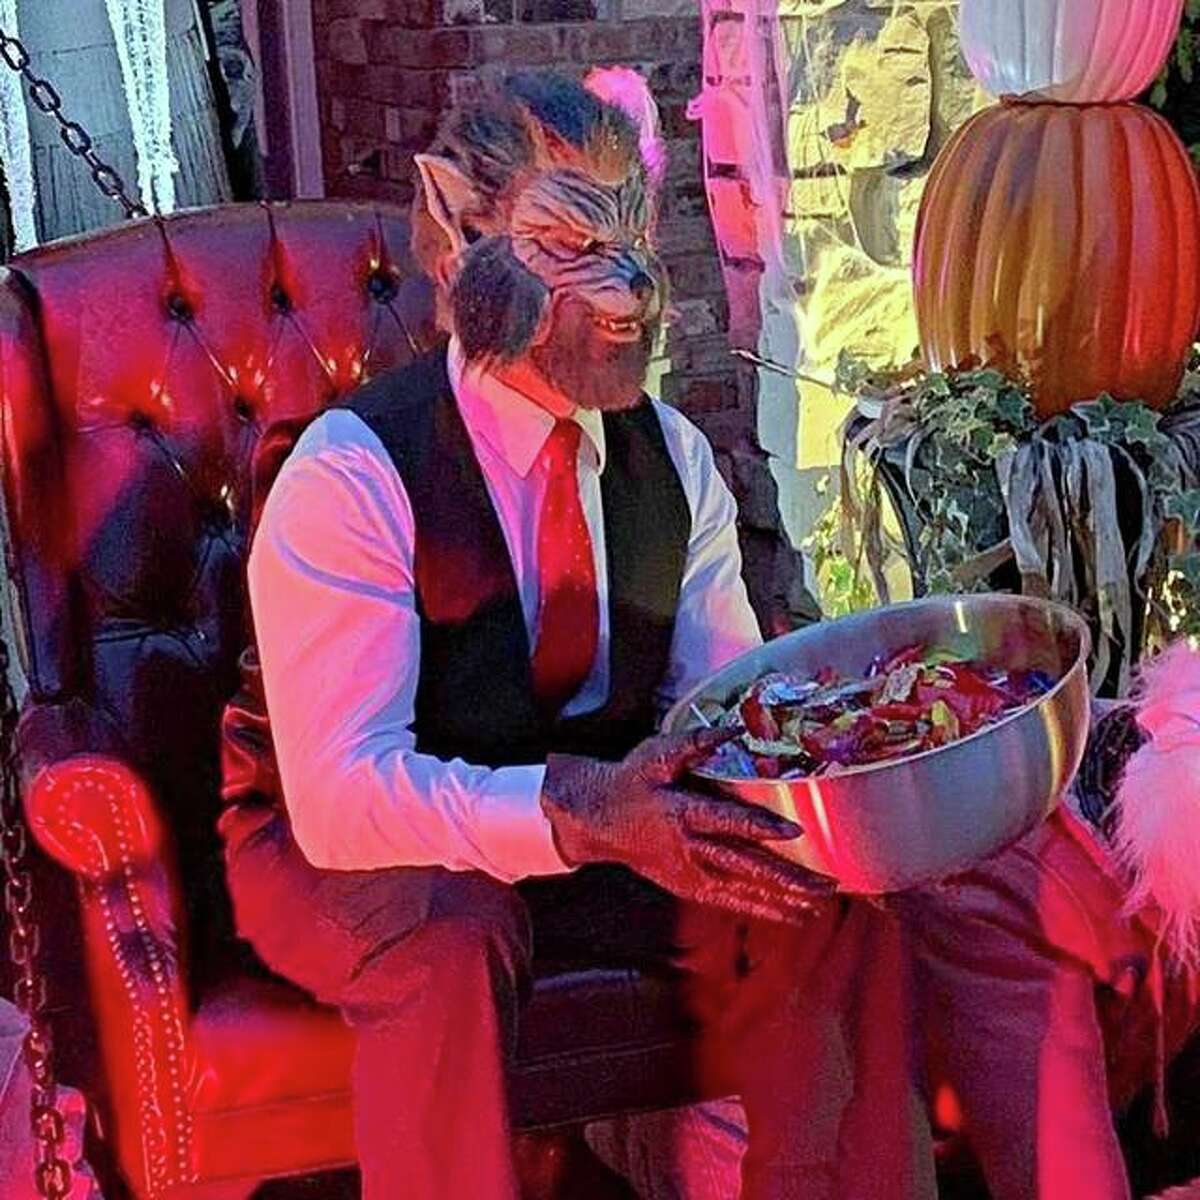 Jeff Garde, dressed as a werewolf, giving candy to trick-or-treaters in 2018. The Glen Carbon goes all out for their annual Halloween display at 54 Oakshire Drive West in Glen Carbon.